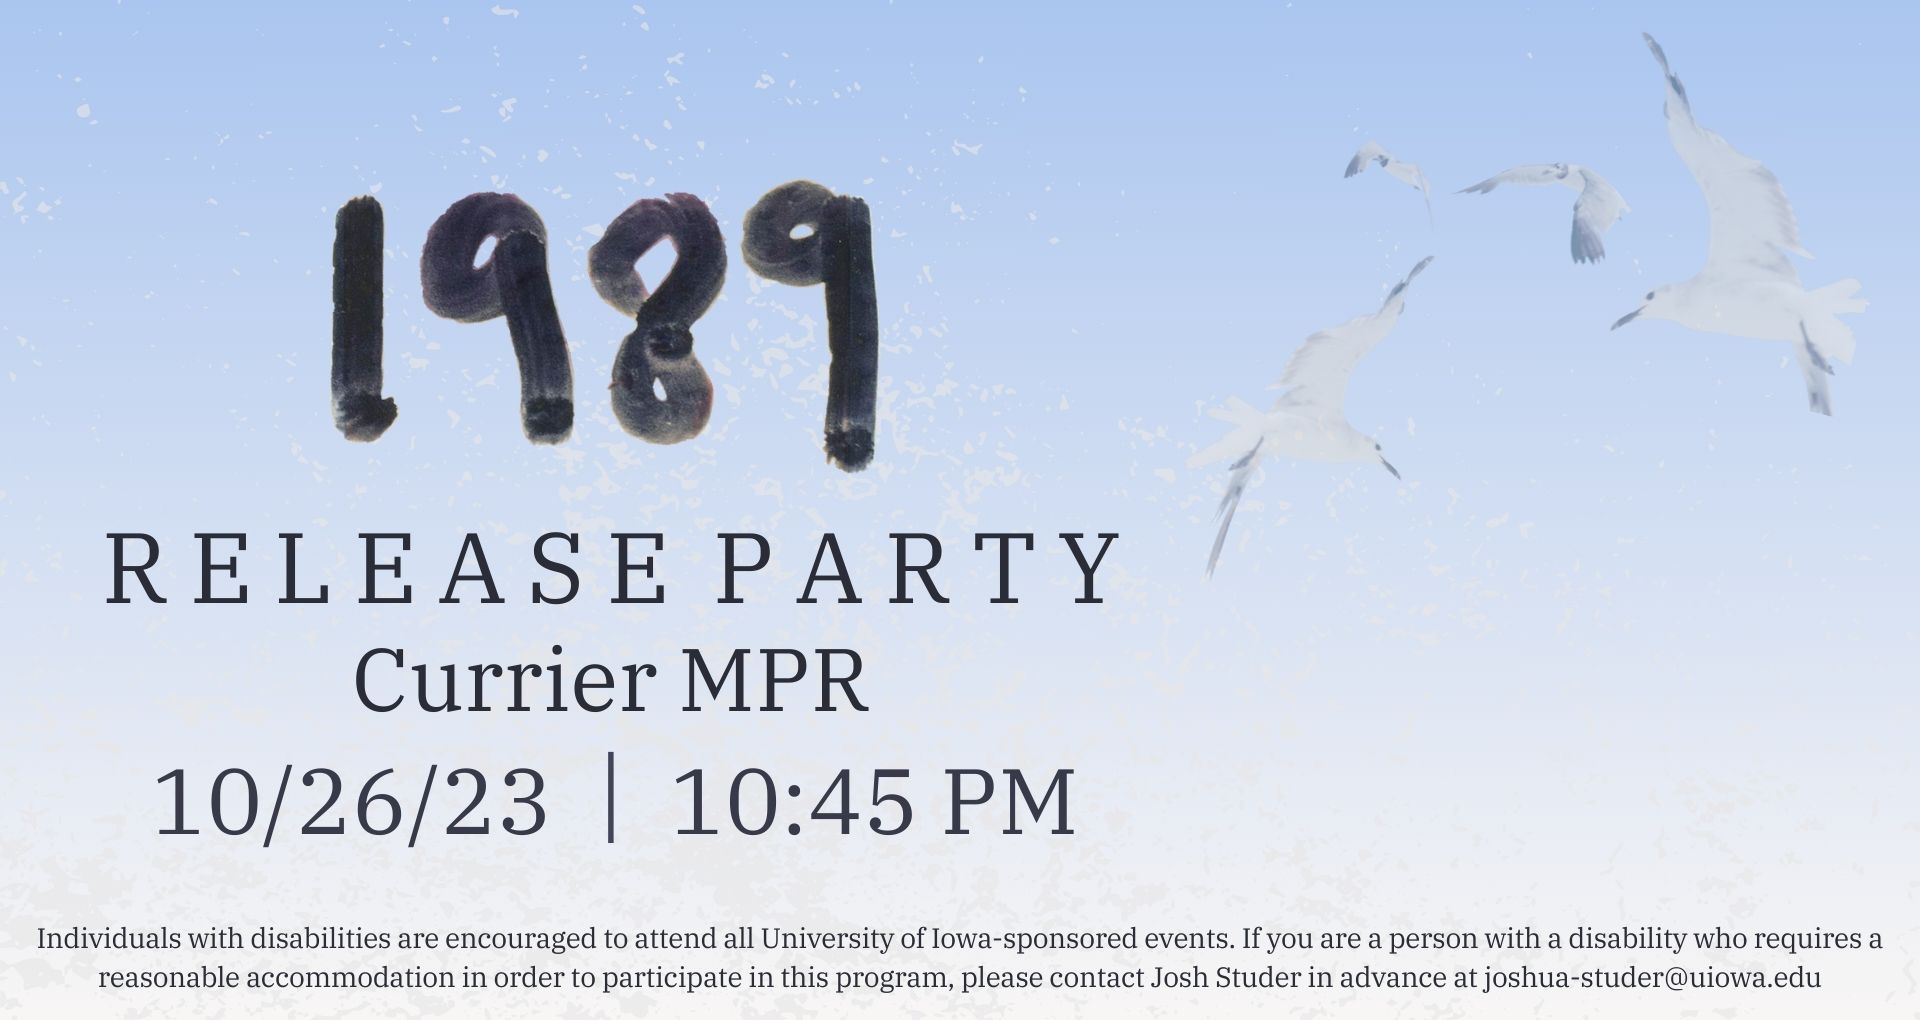 1989 release party at Currier 10.26.2023